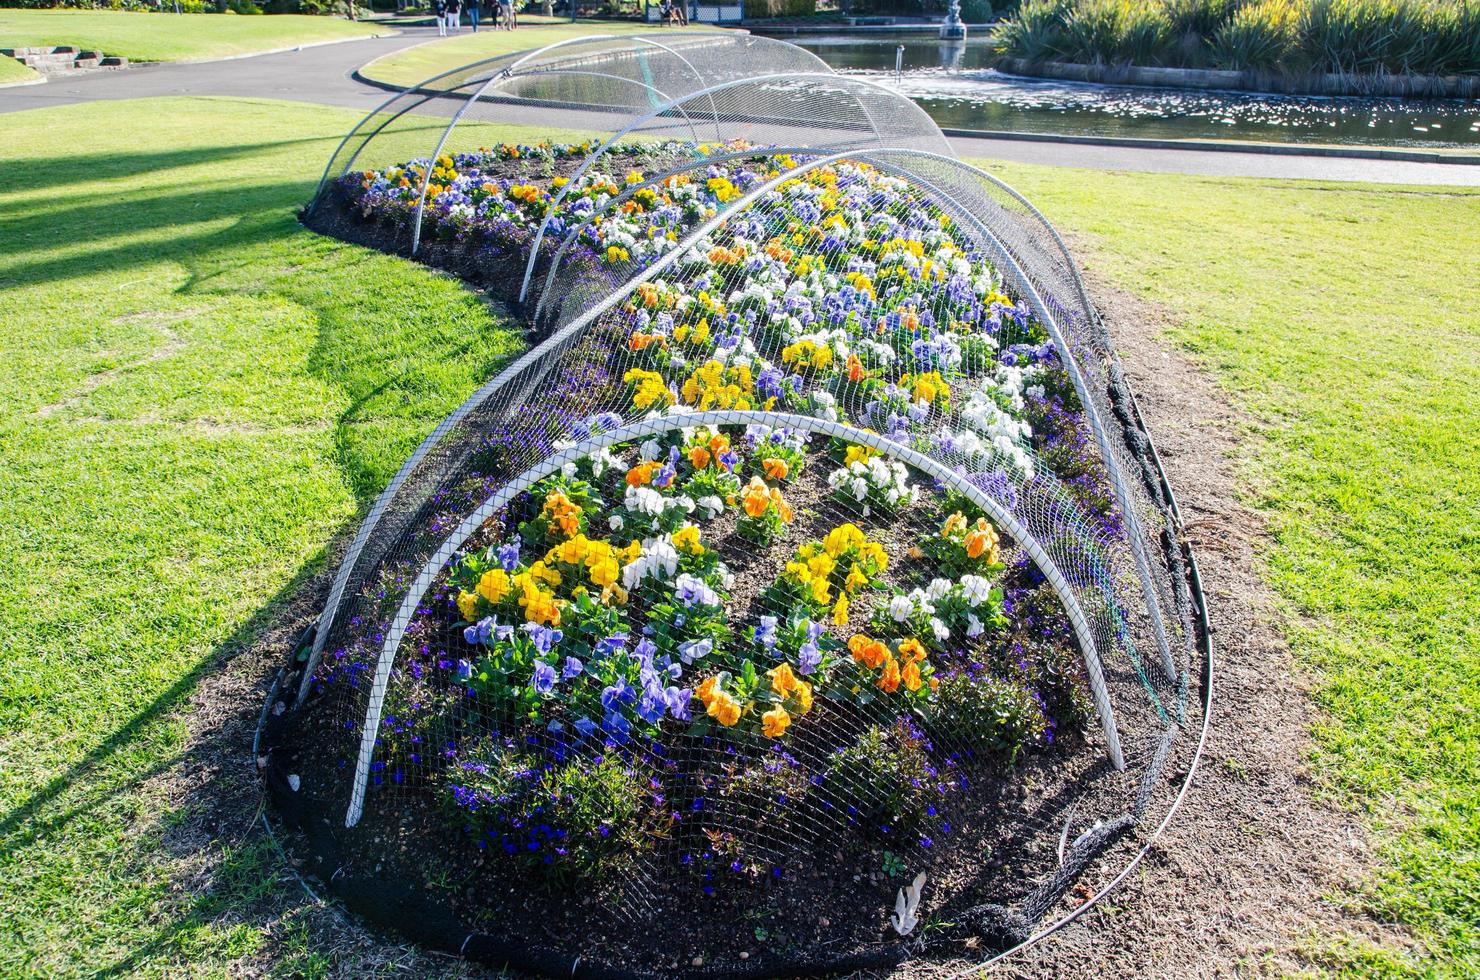 The flower garden has protected by cover up with bird Netting. photo